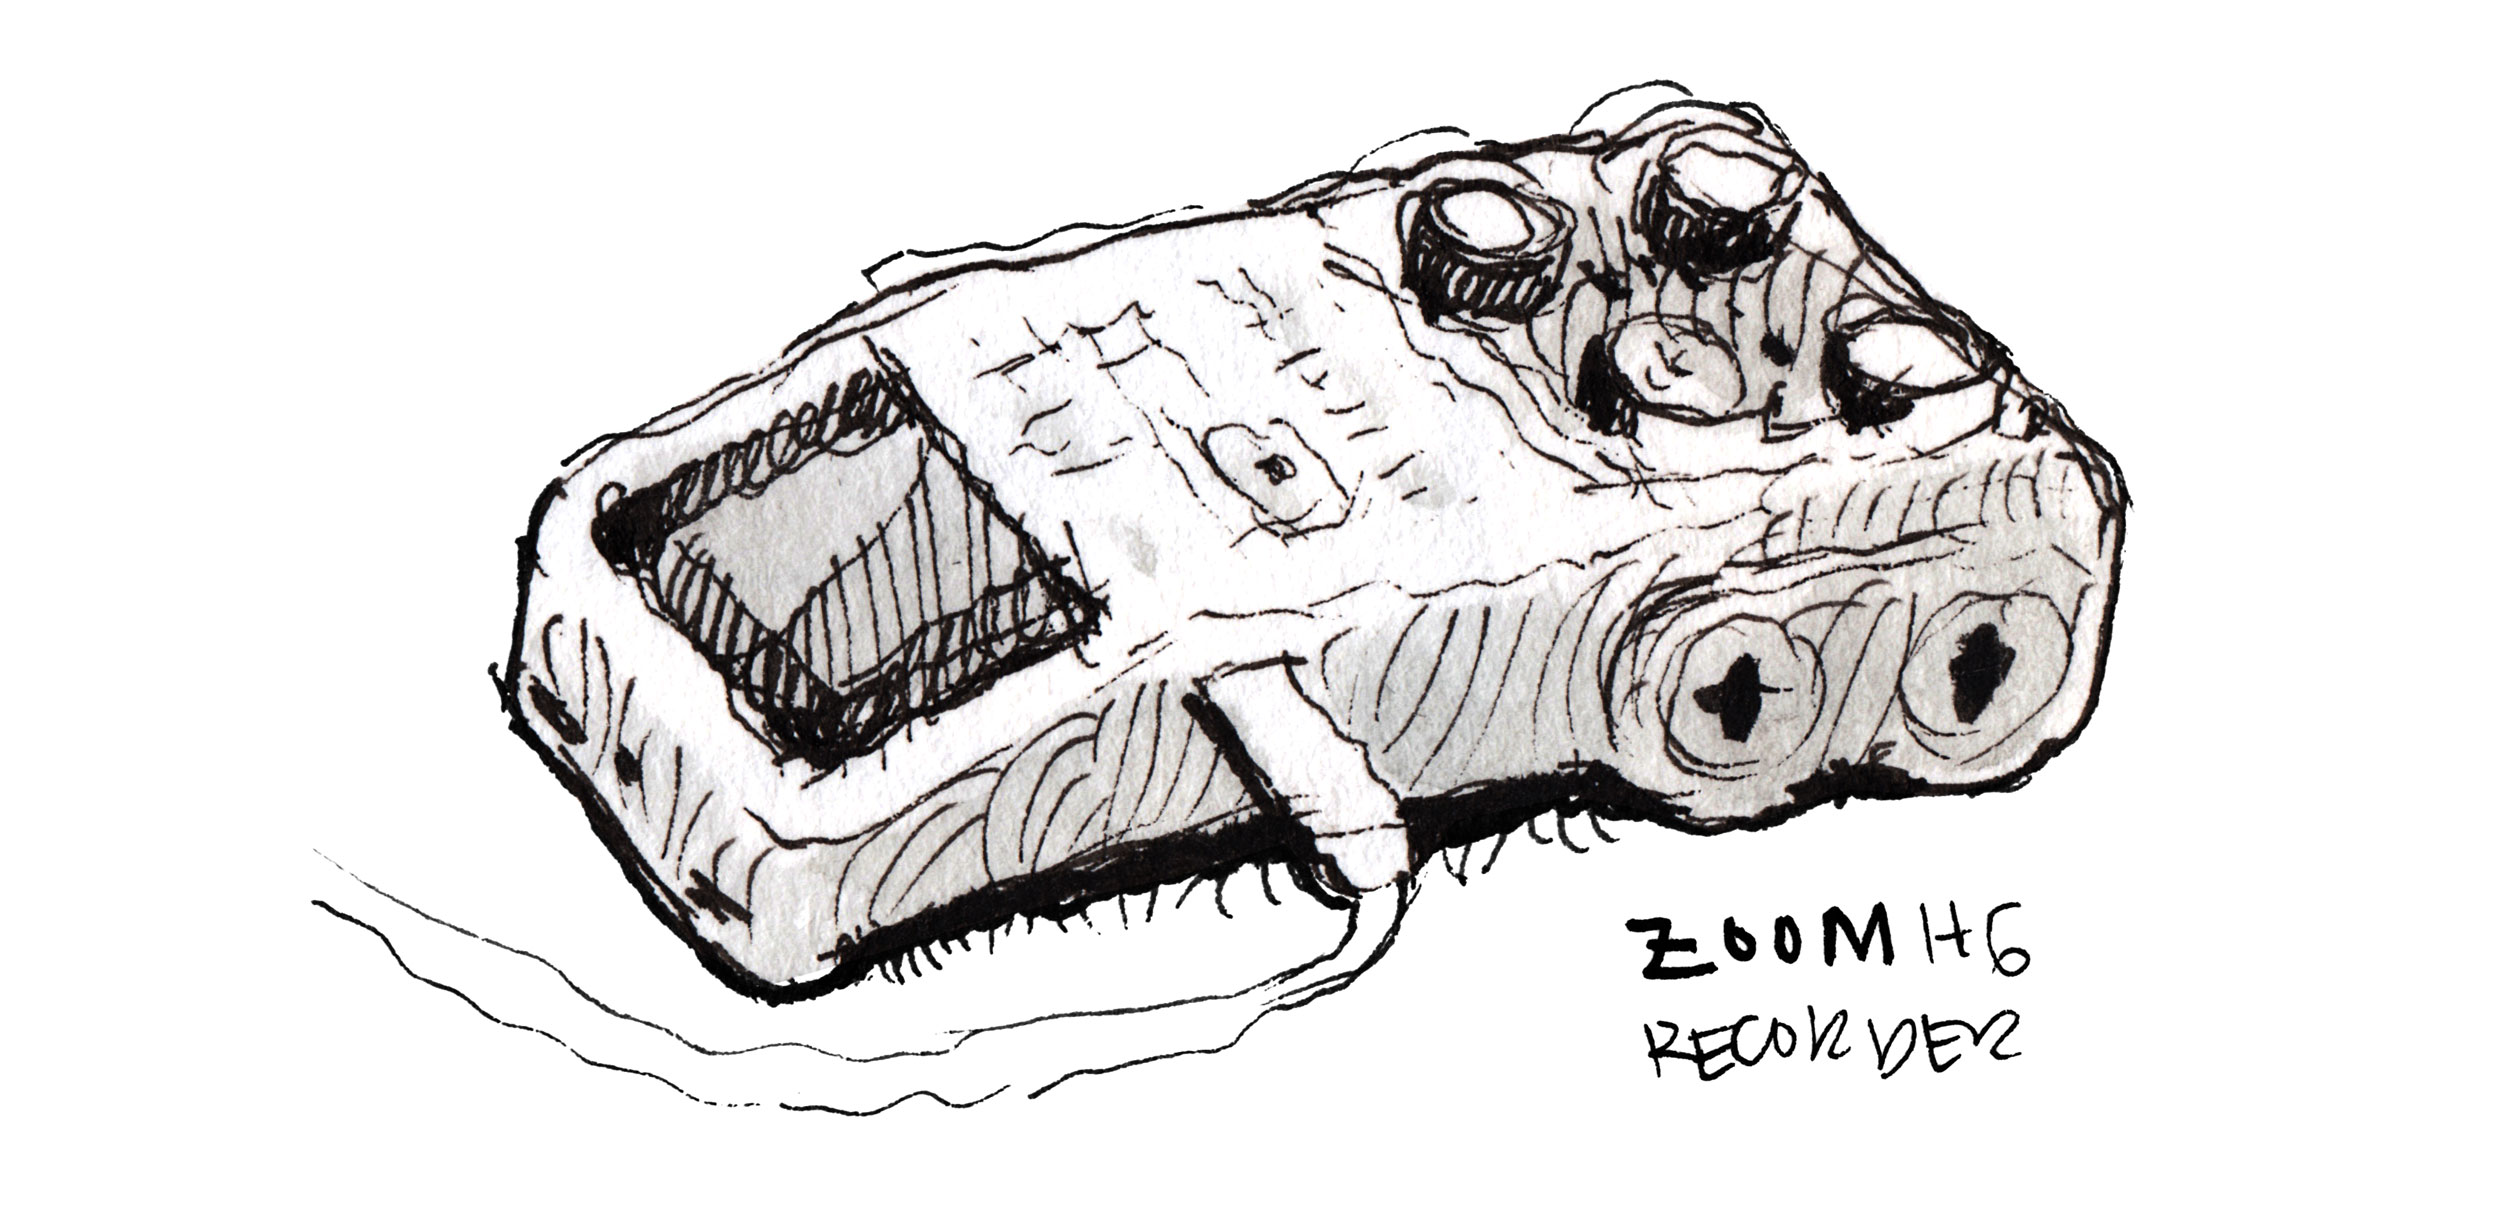 Sketch of a Zoom H6 hand recorder.